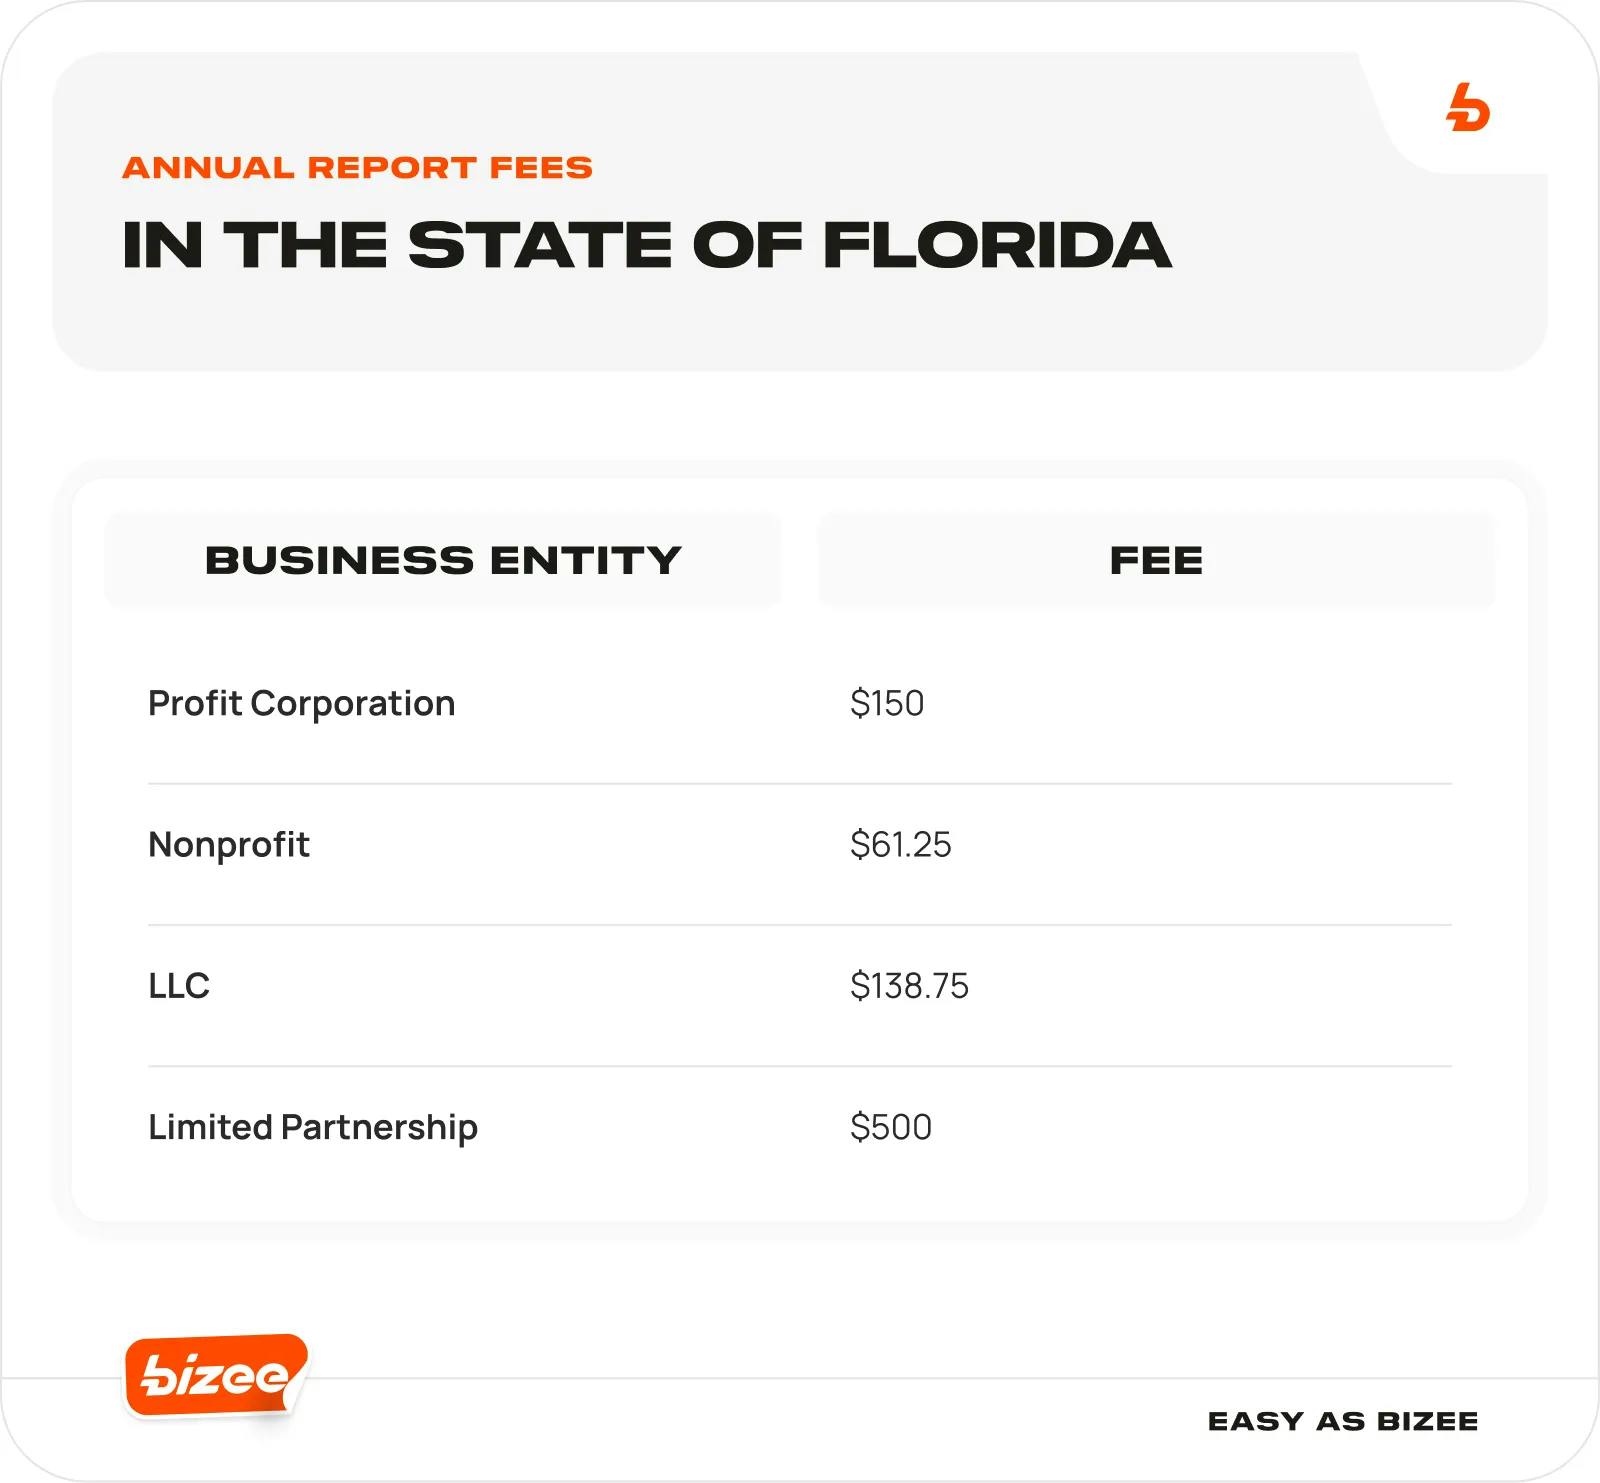 Annual Report Fees in the State of Florida